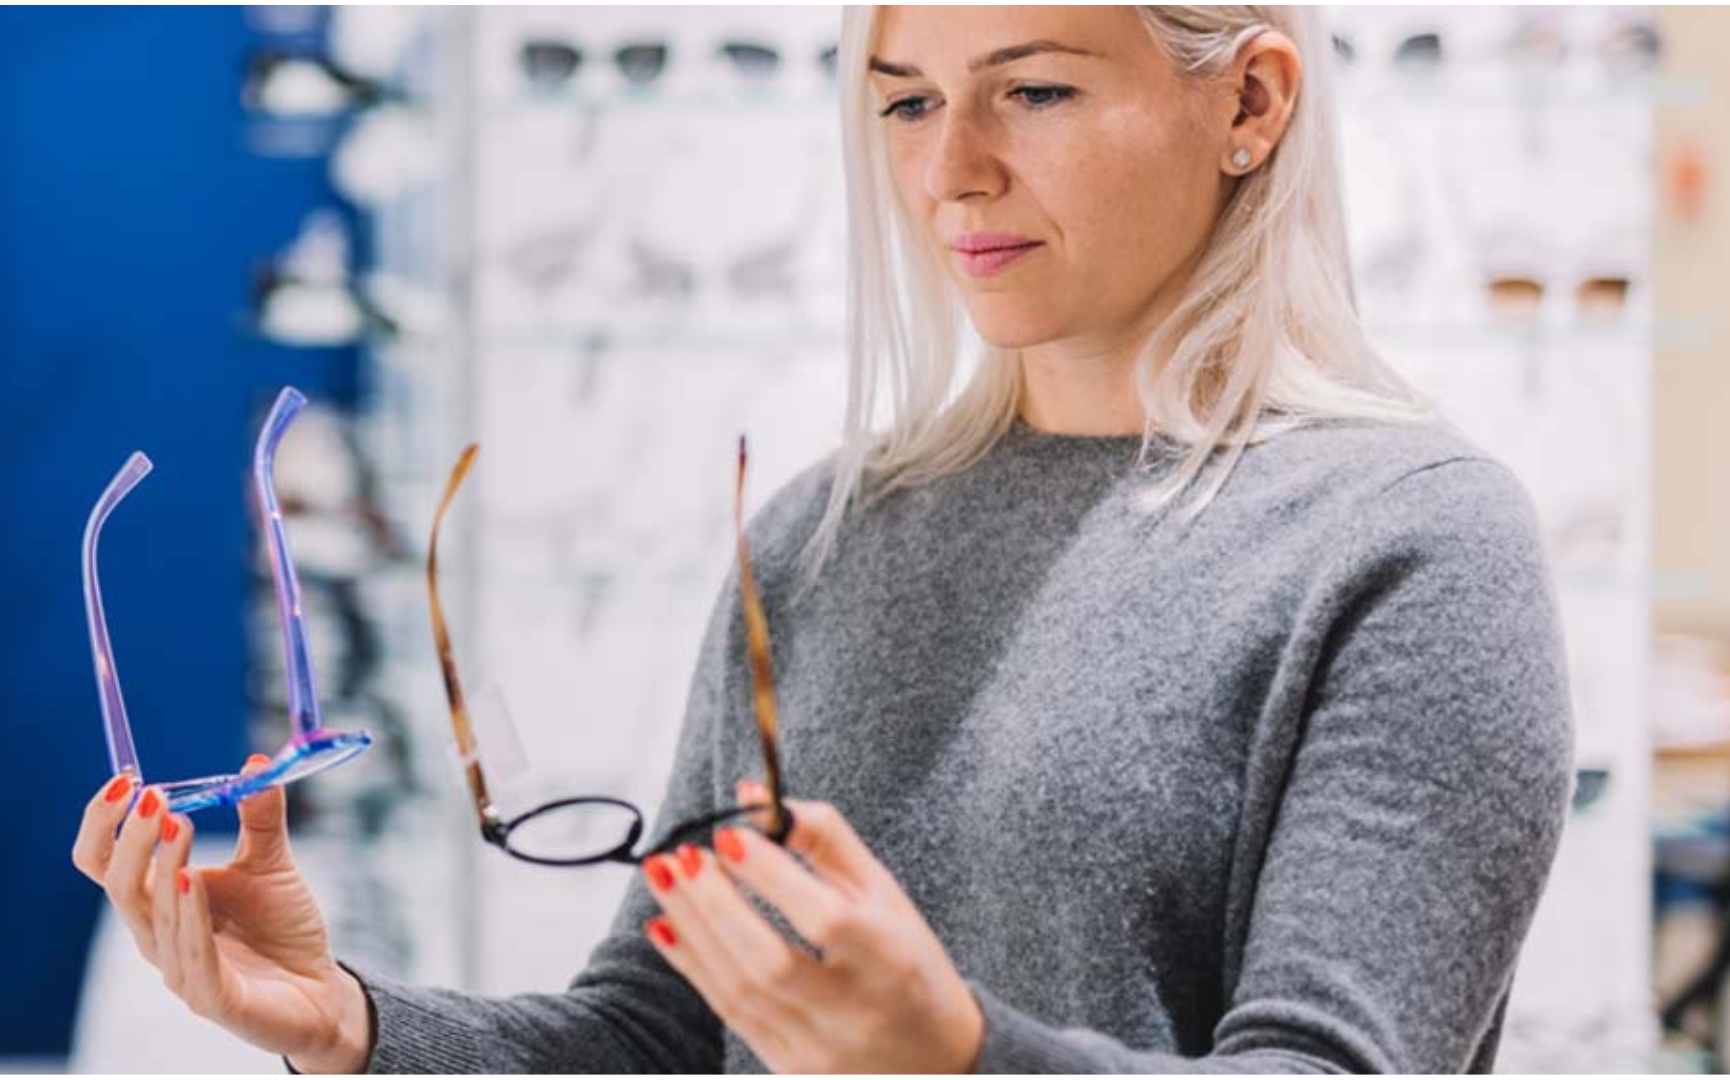 woman choosing to purchase optical lens